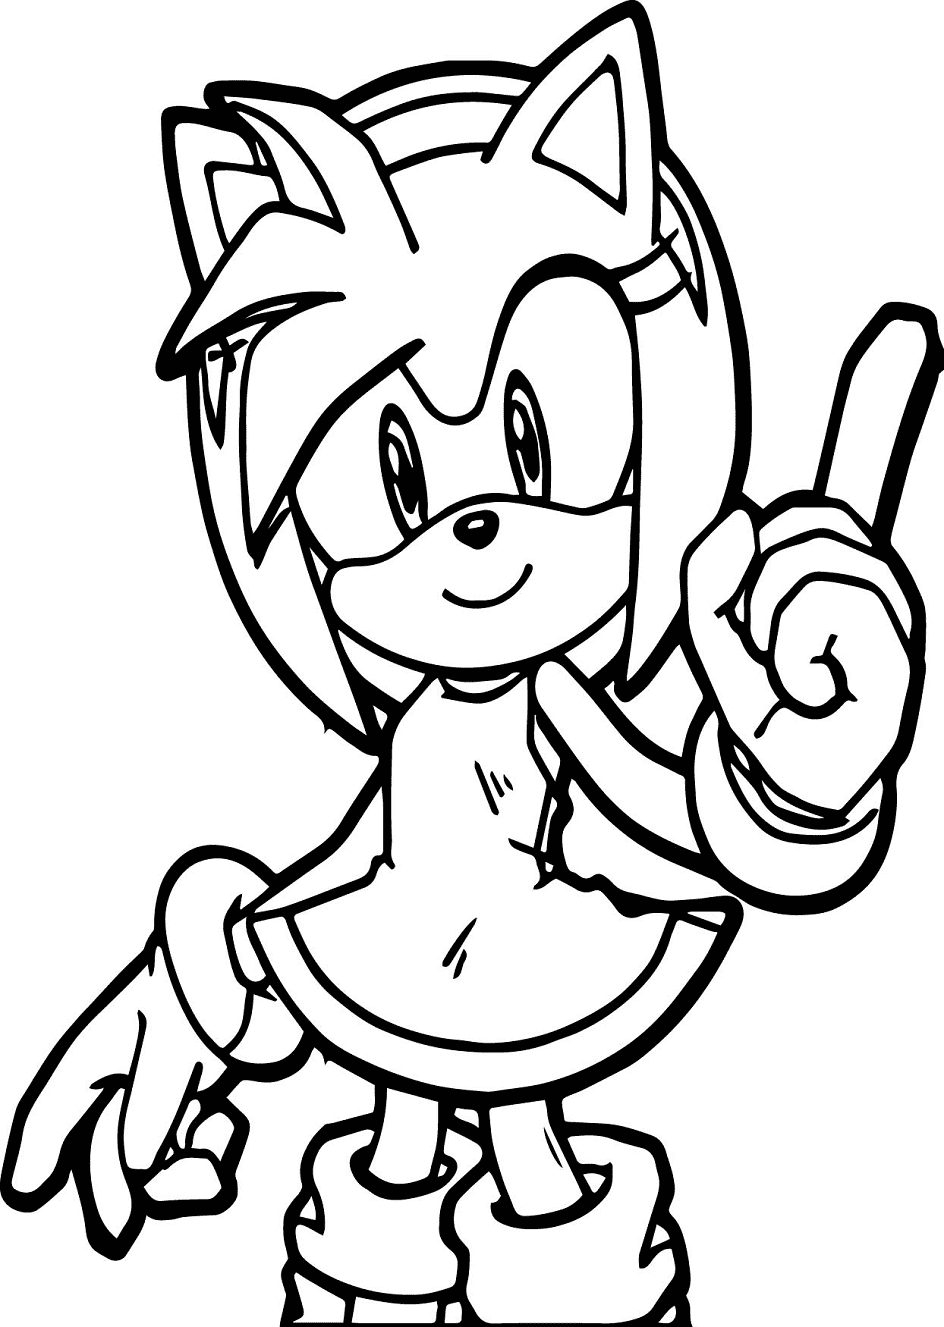 Amy Rose is Smiling Coloring Page